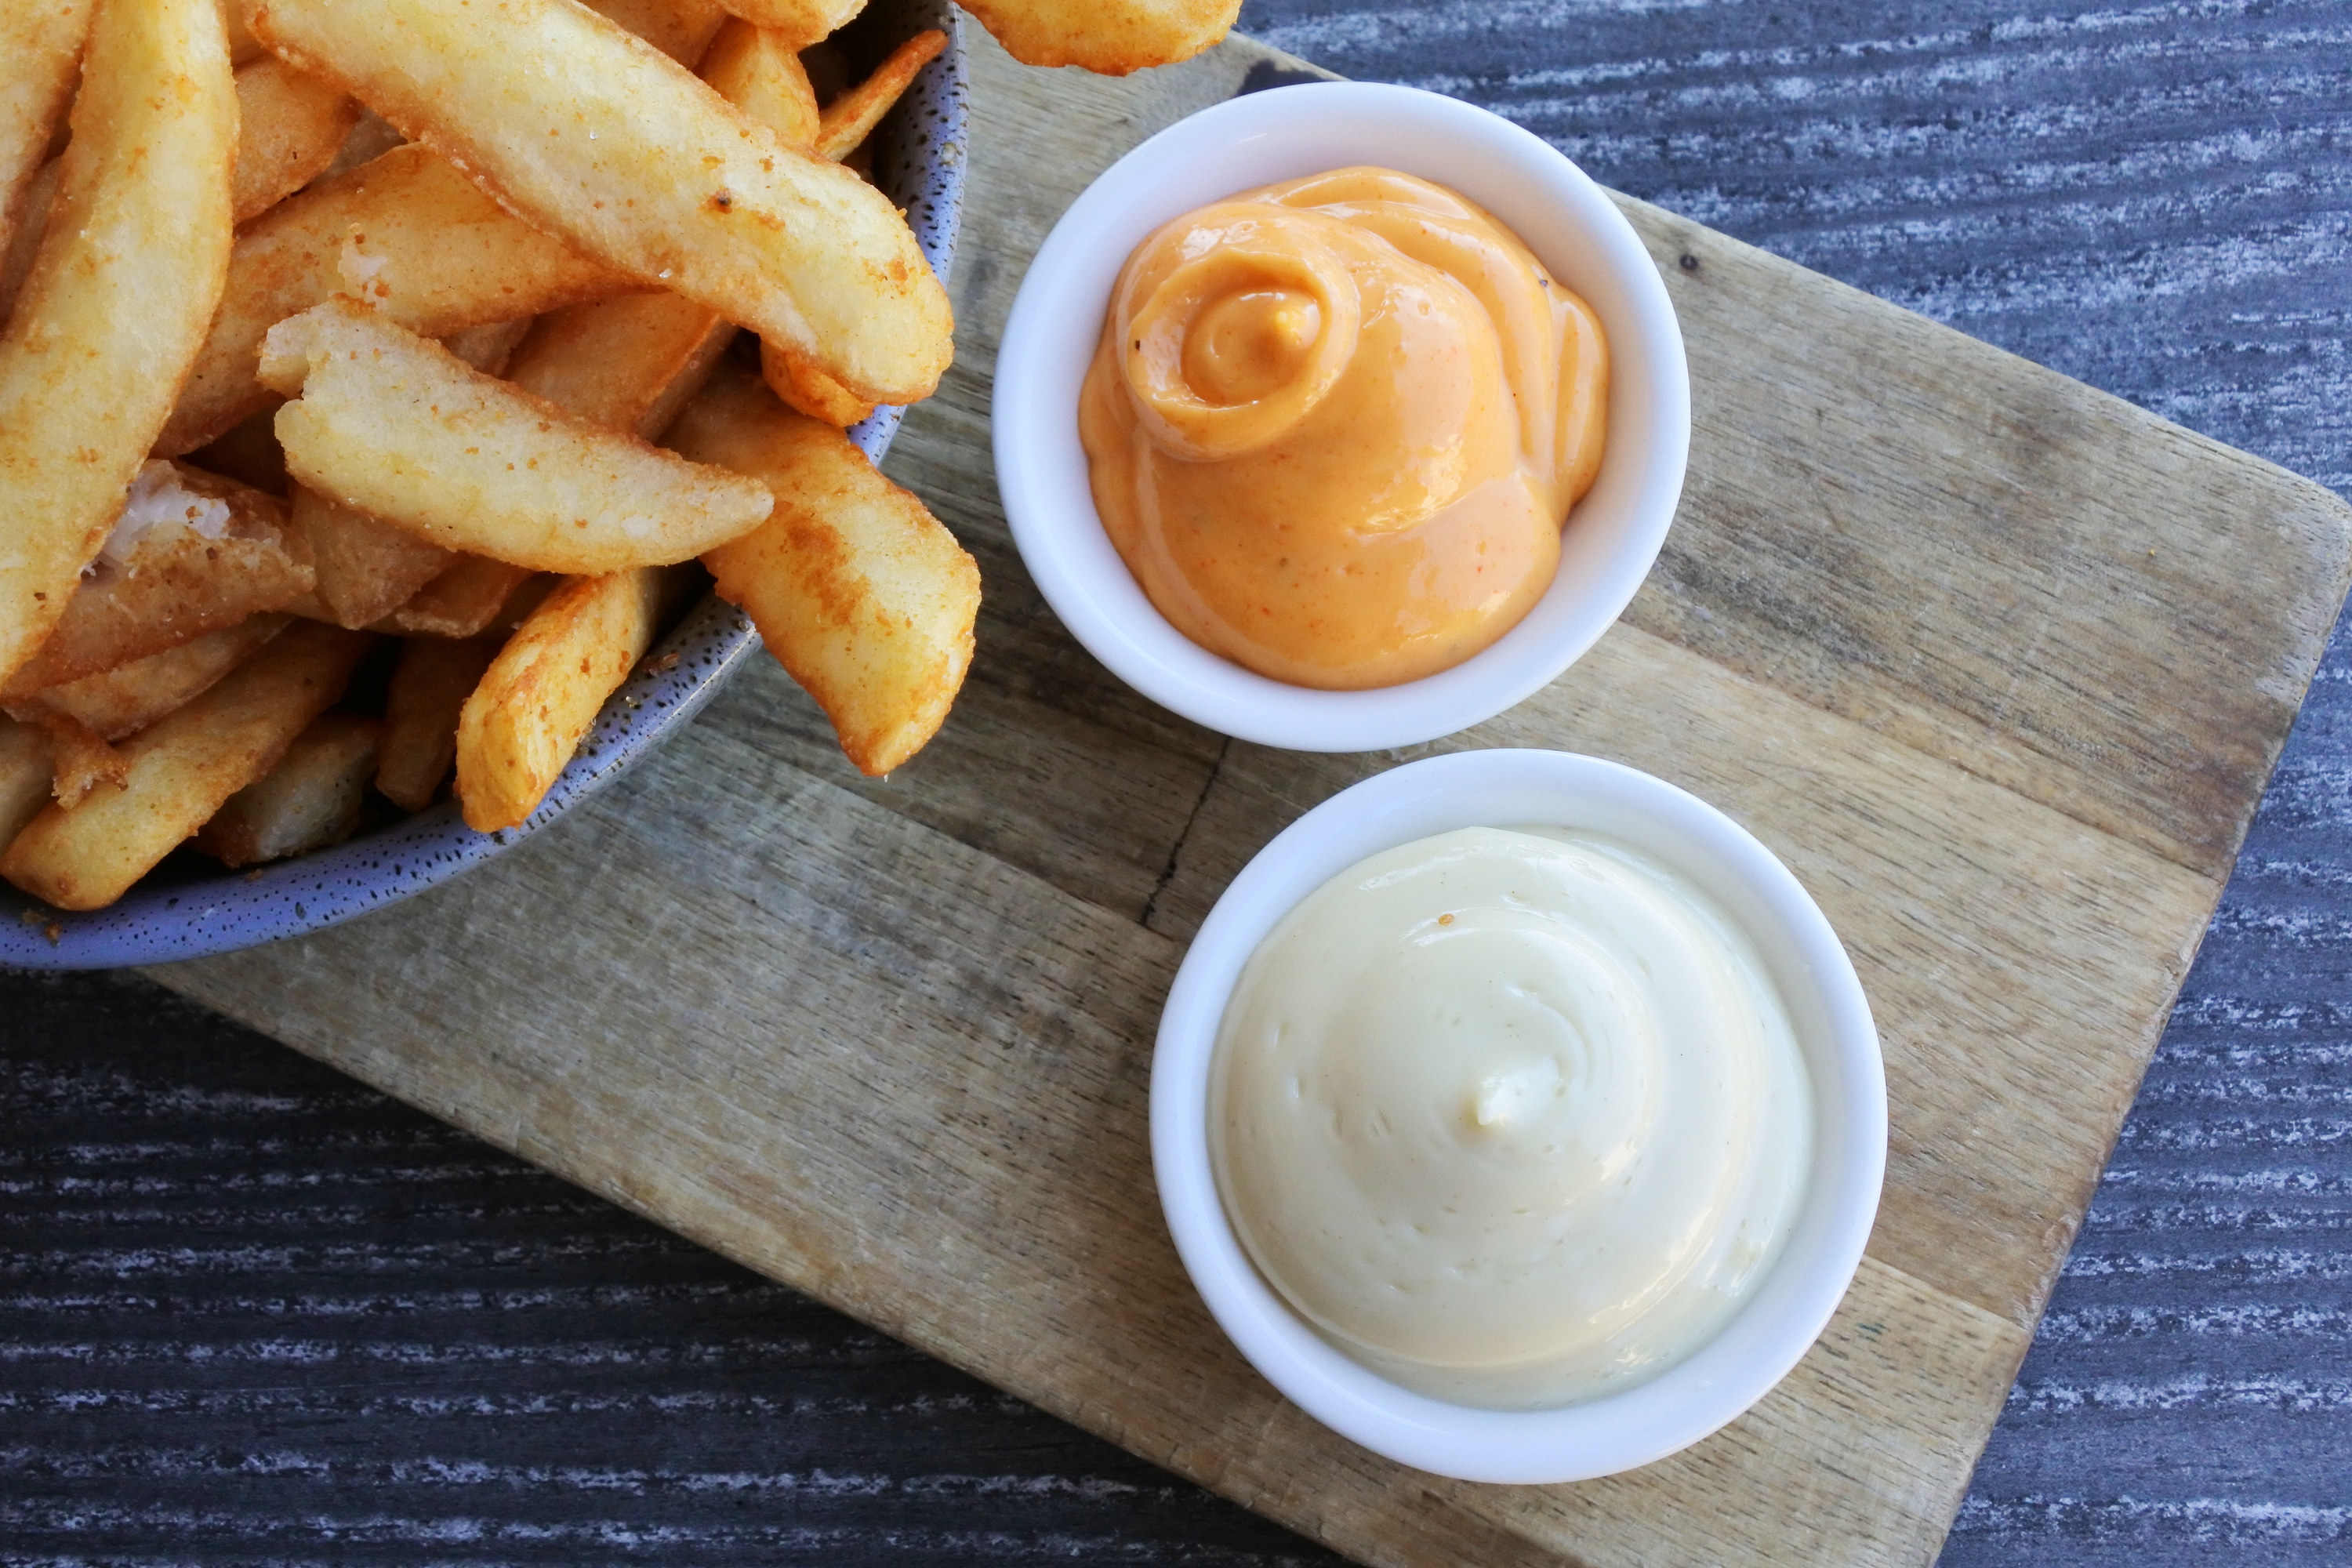 Fries and dips